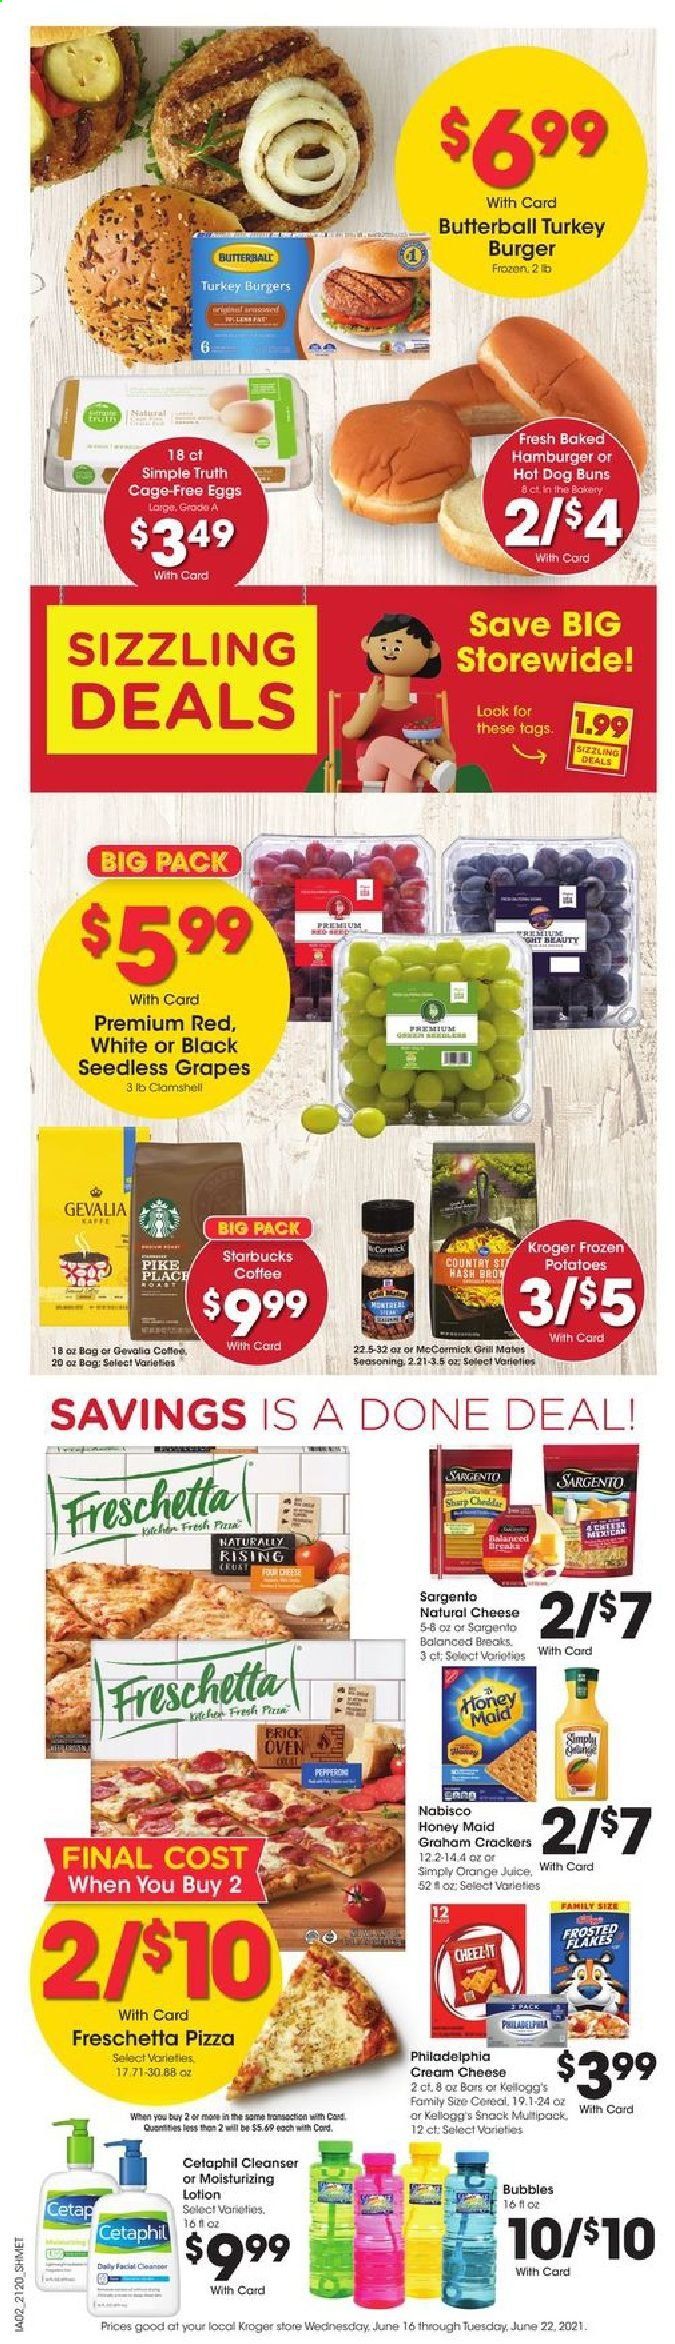 thumbnail - Kroger Flyer - 06/16/2021 - 06/22/2021 - Sales products - seedless grapes, buns, potatoes, grapes, pizza, Butterball, cream cheese, Philadelphia, Sargento, eggs, cage free eggs, graham crackers, crackers, Kellogg's, Frosted Flakes, Honey Maid, spice, orange juice, juice, Starbucks, Gevalia, turkey burger, cleanser, body lotion, Sharp, oven. Page 8.